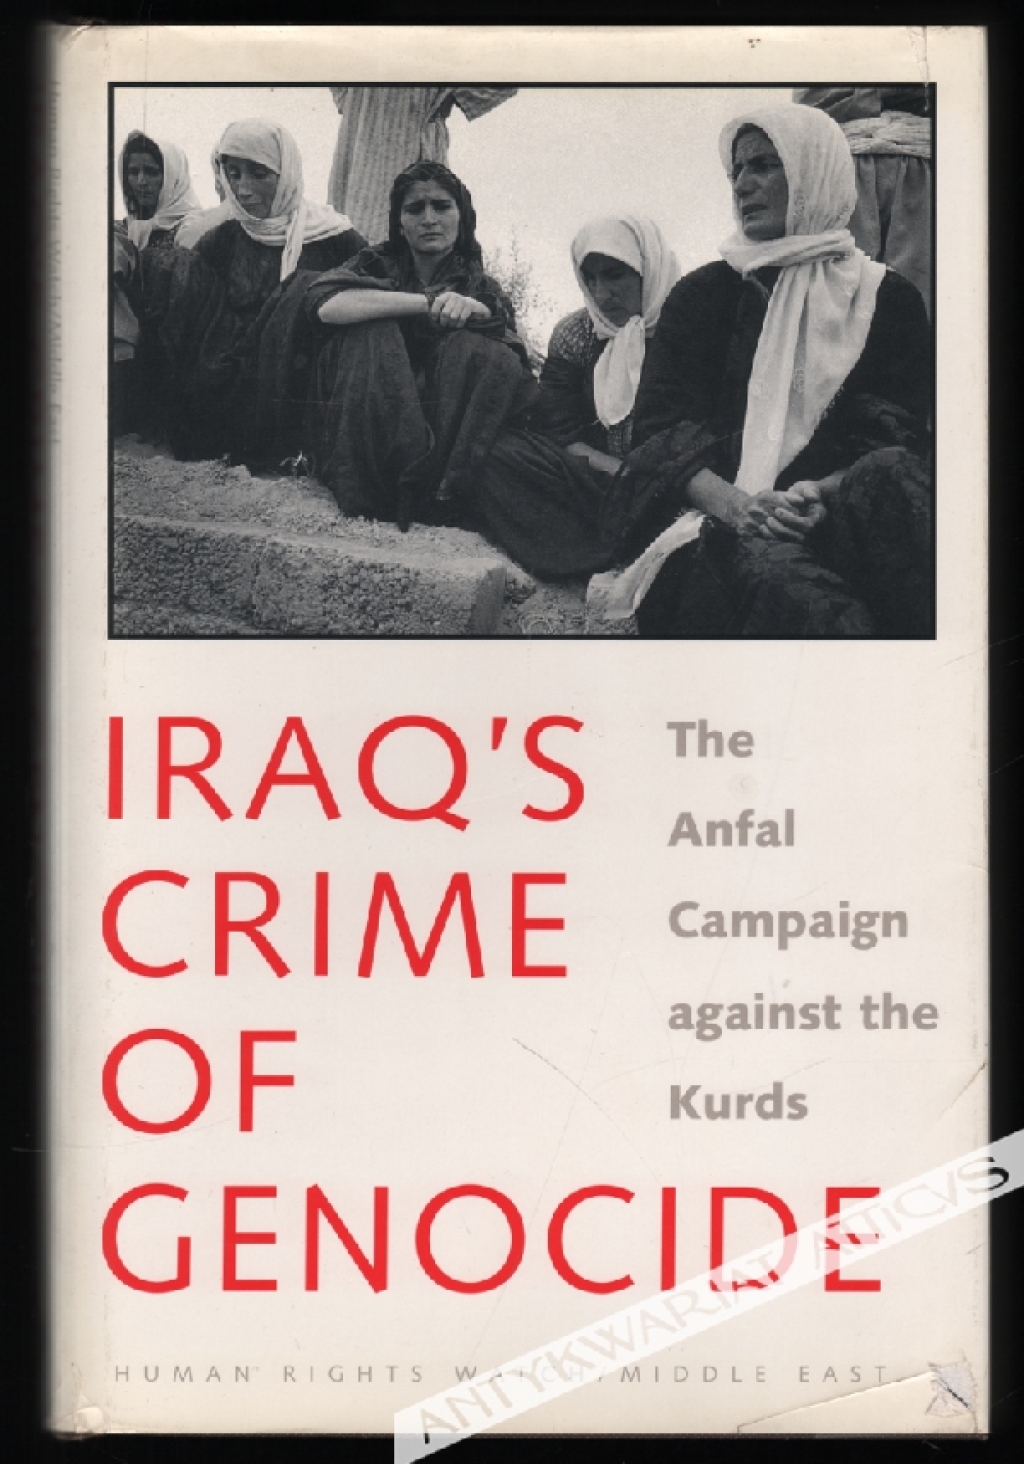 Iraq's Crime of Genocide: The Anfal Campaign Against the Kurds